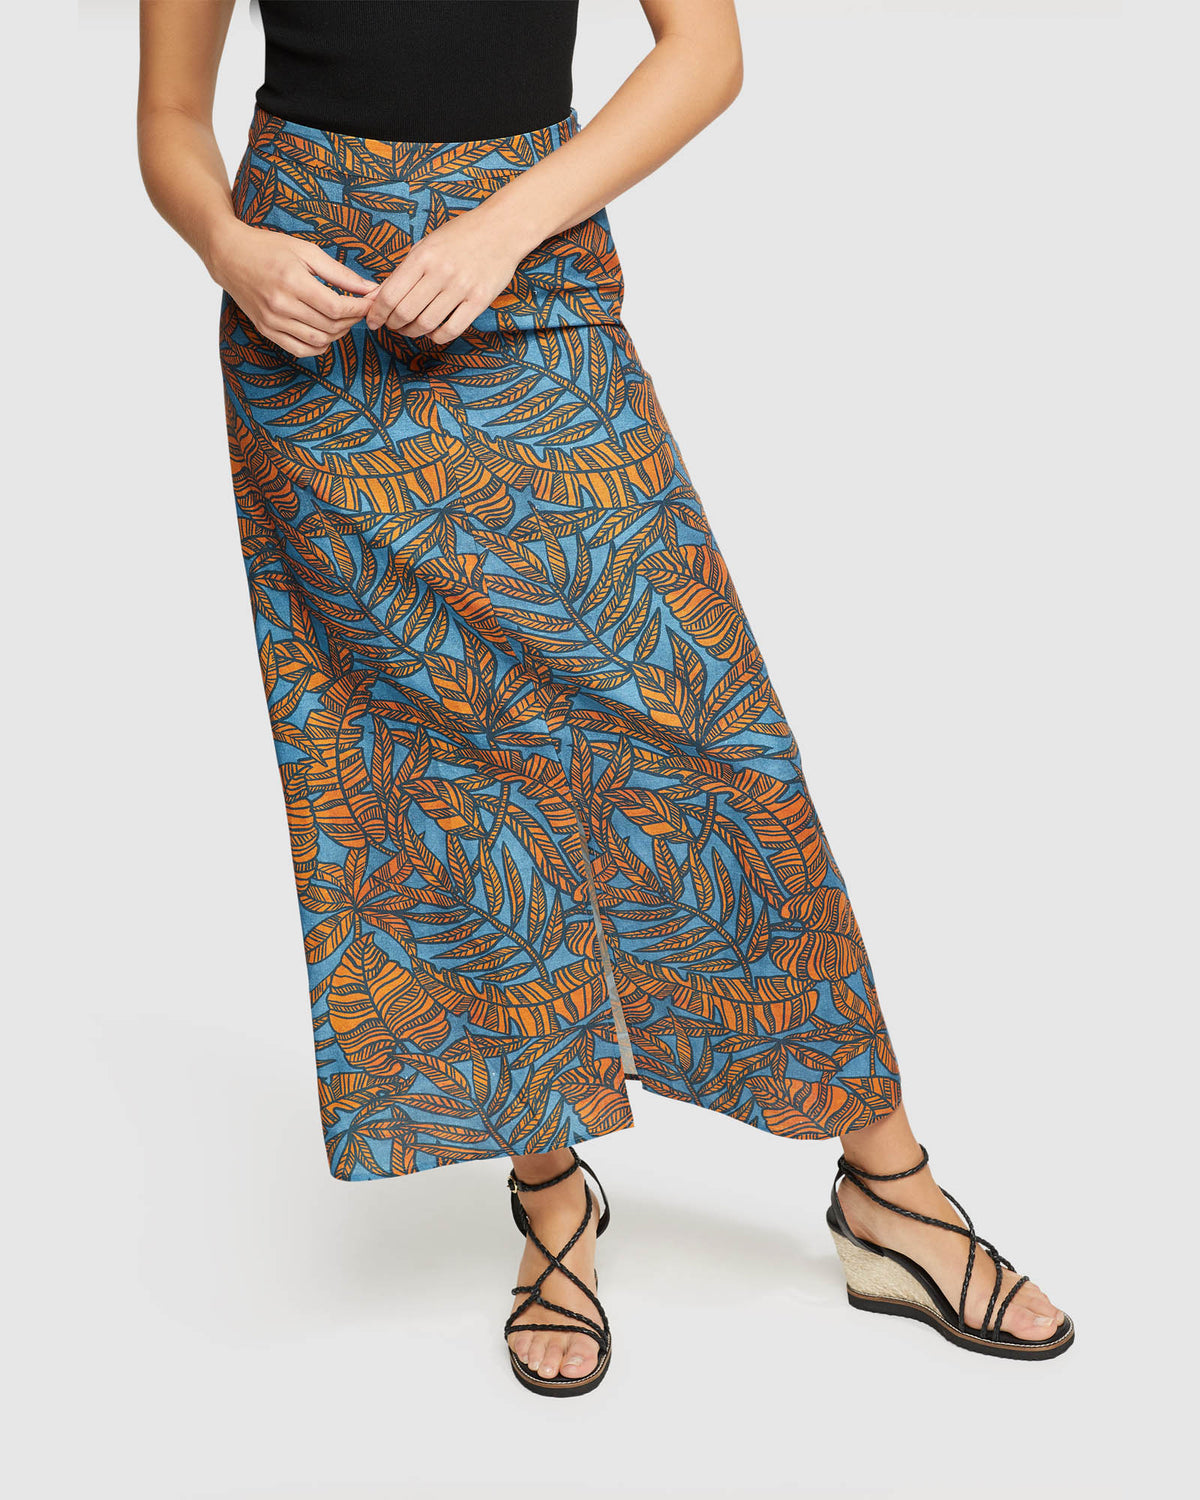 OVERBOARD TROPICAL PRINT SKIRT WOMENS SKIRTS